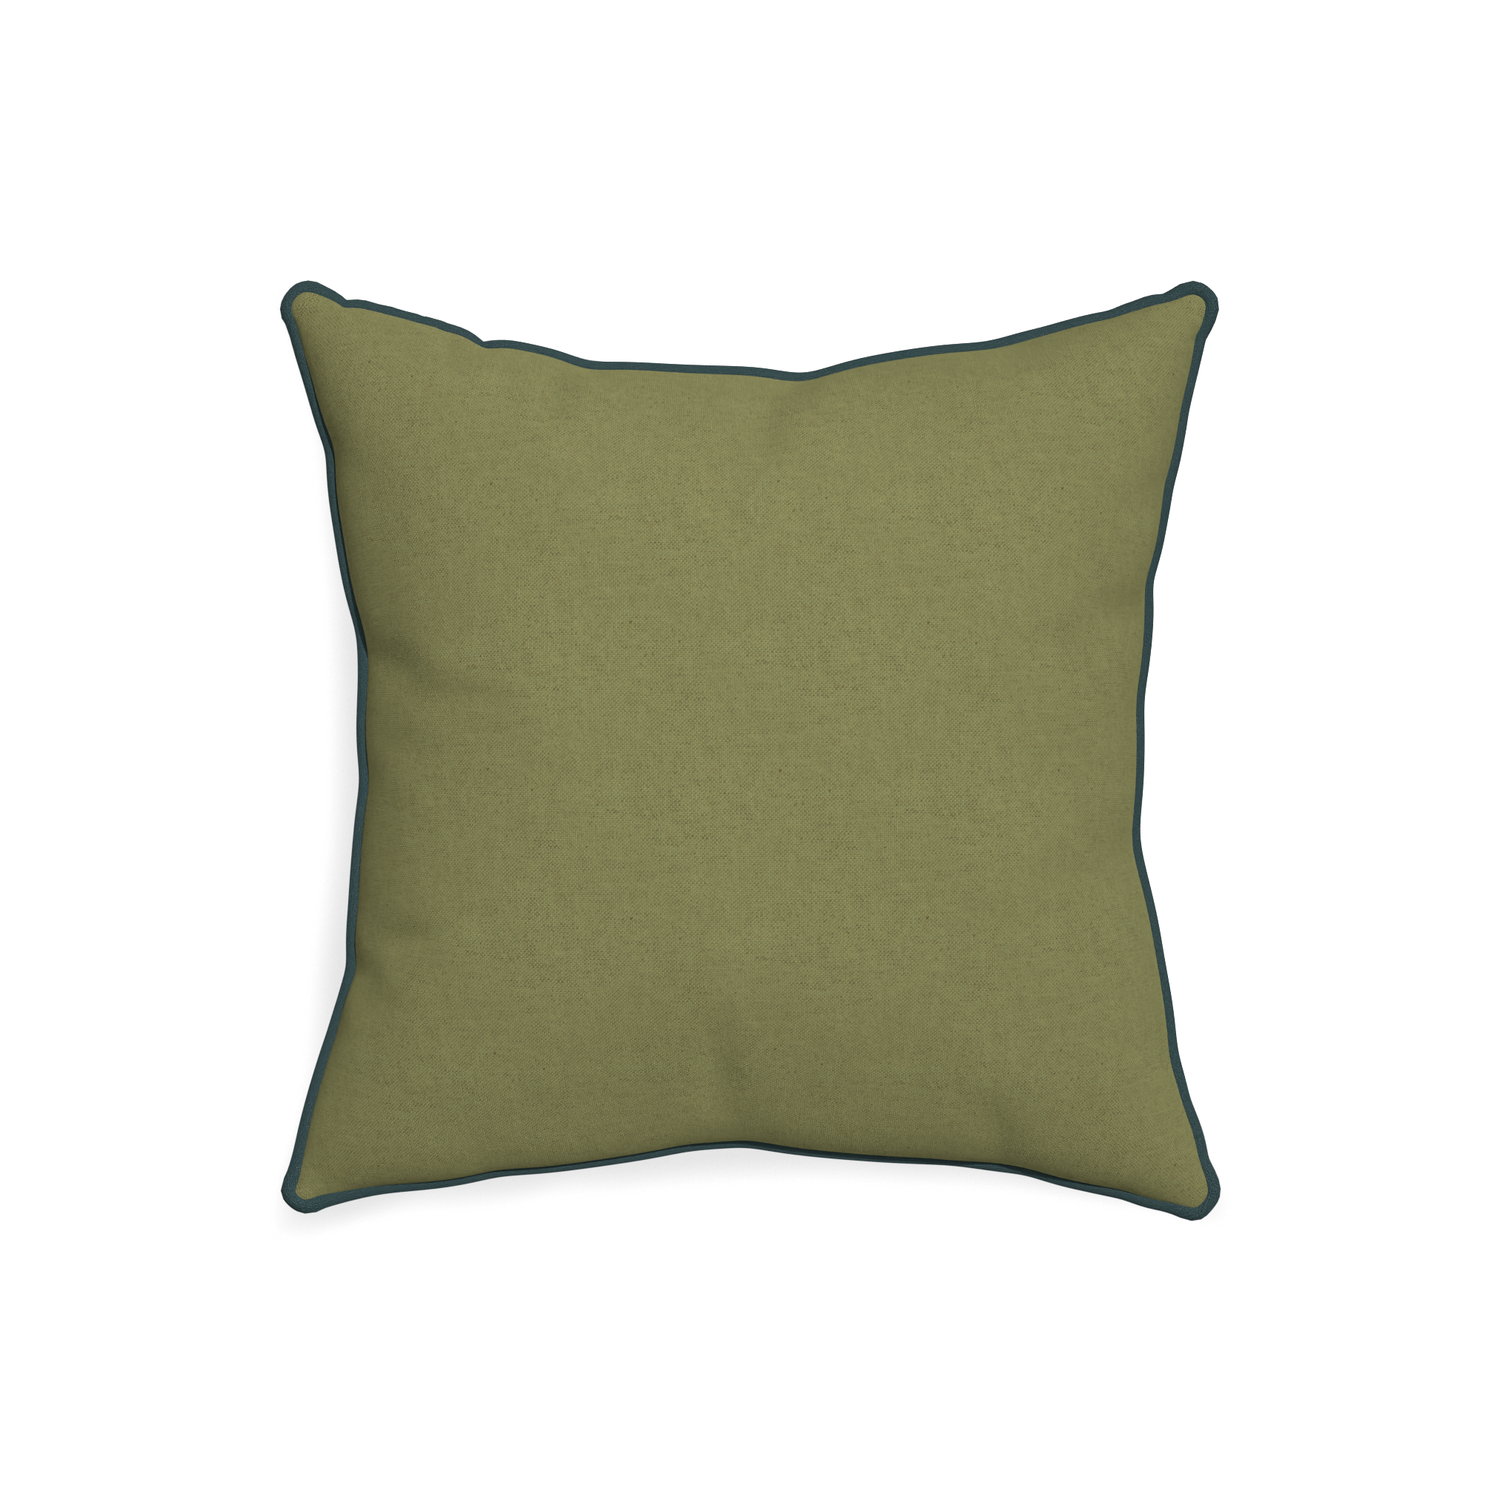 20-square moss custom moss greenpillow with p piping on white background